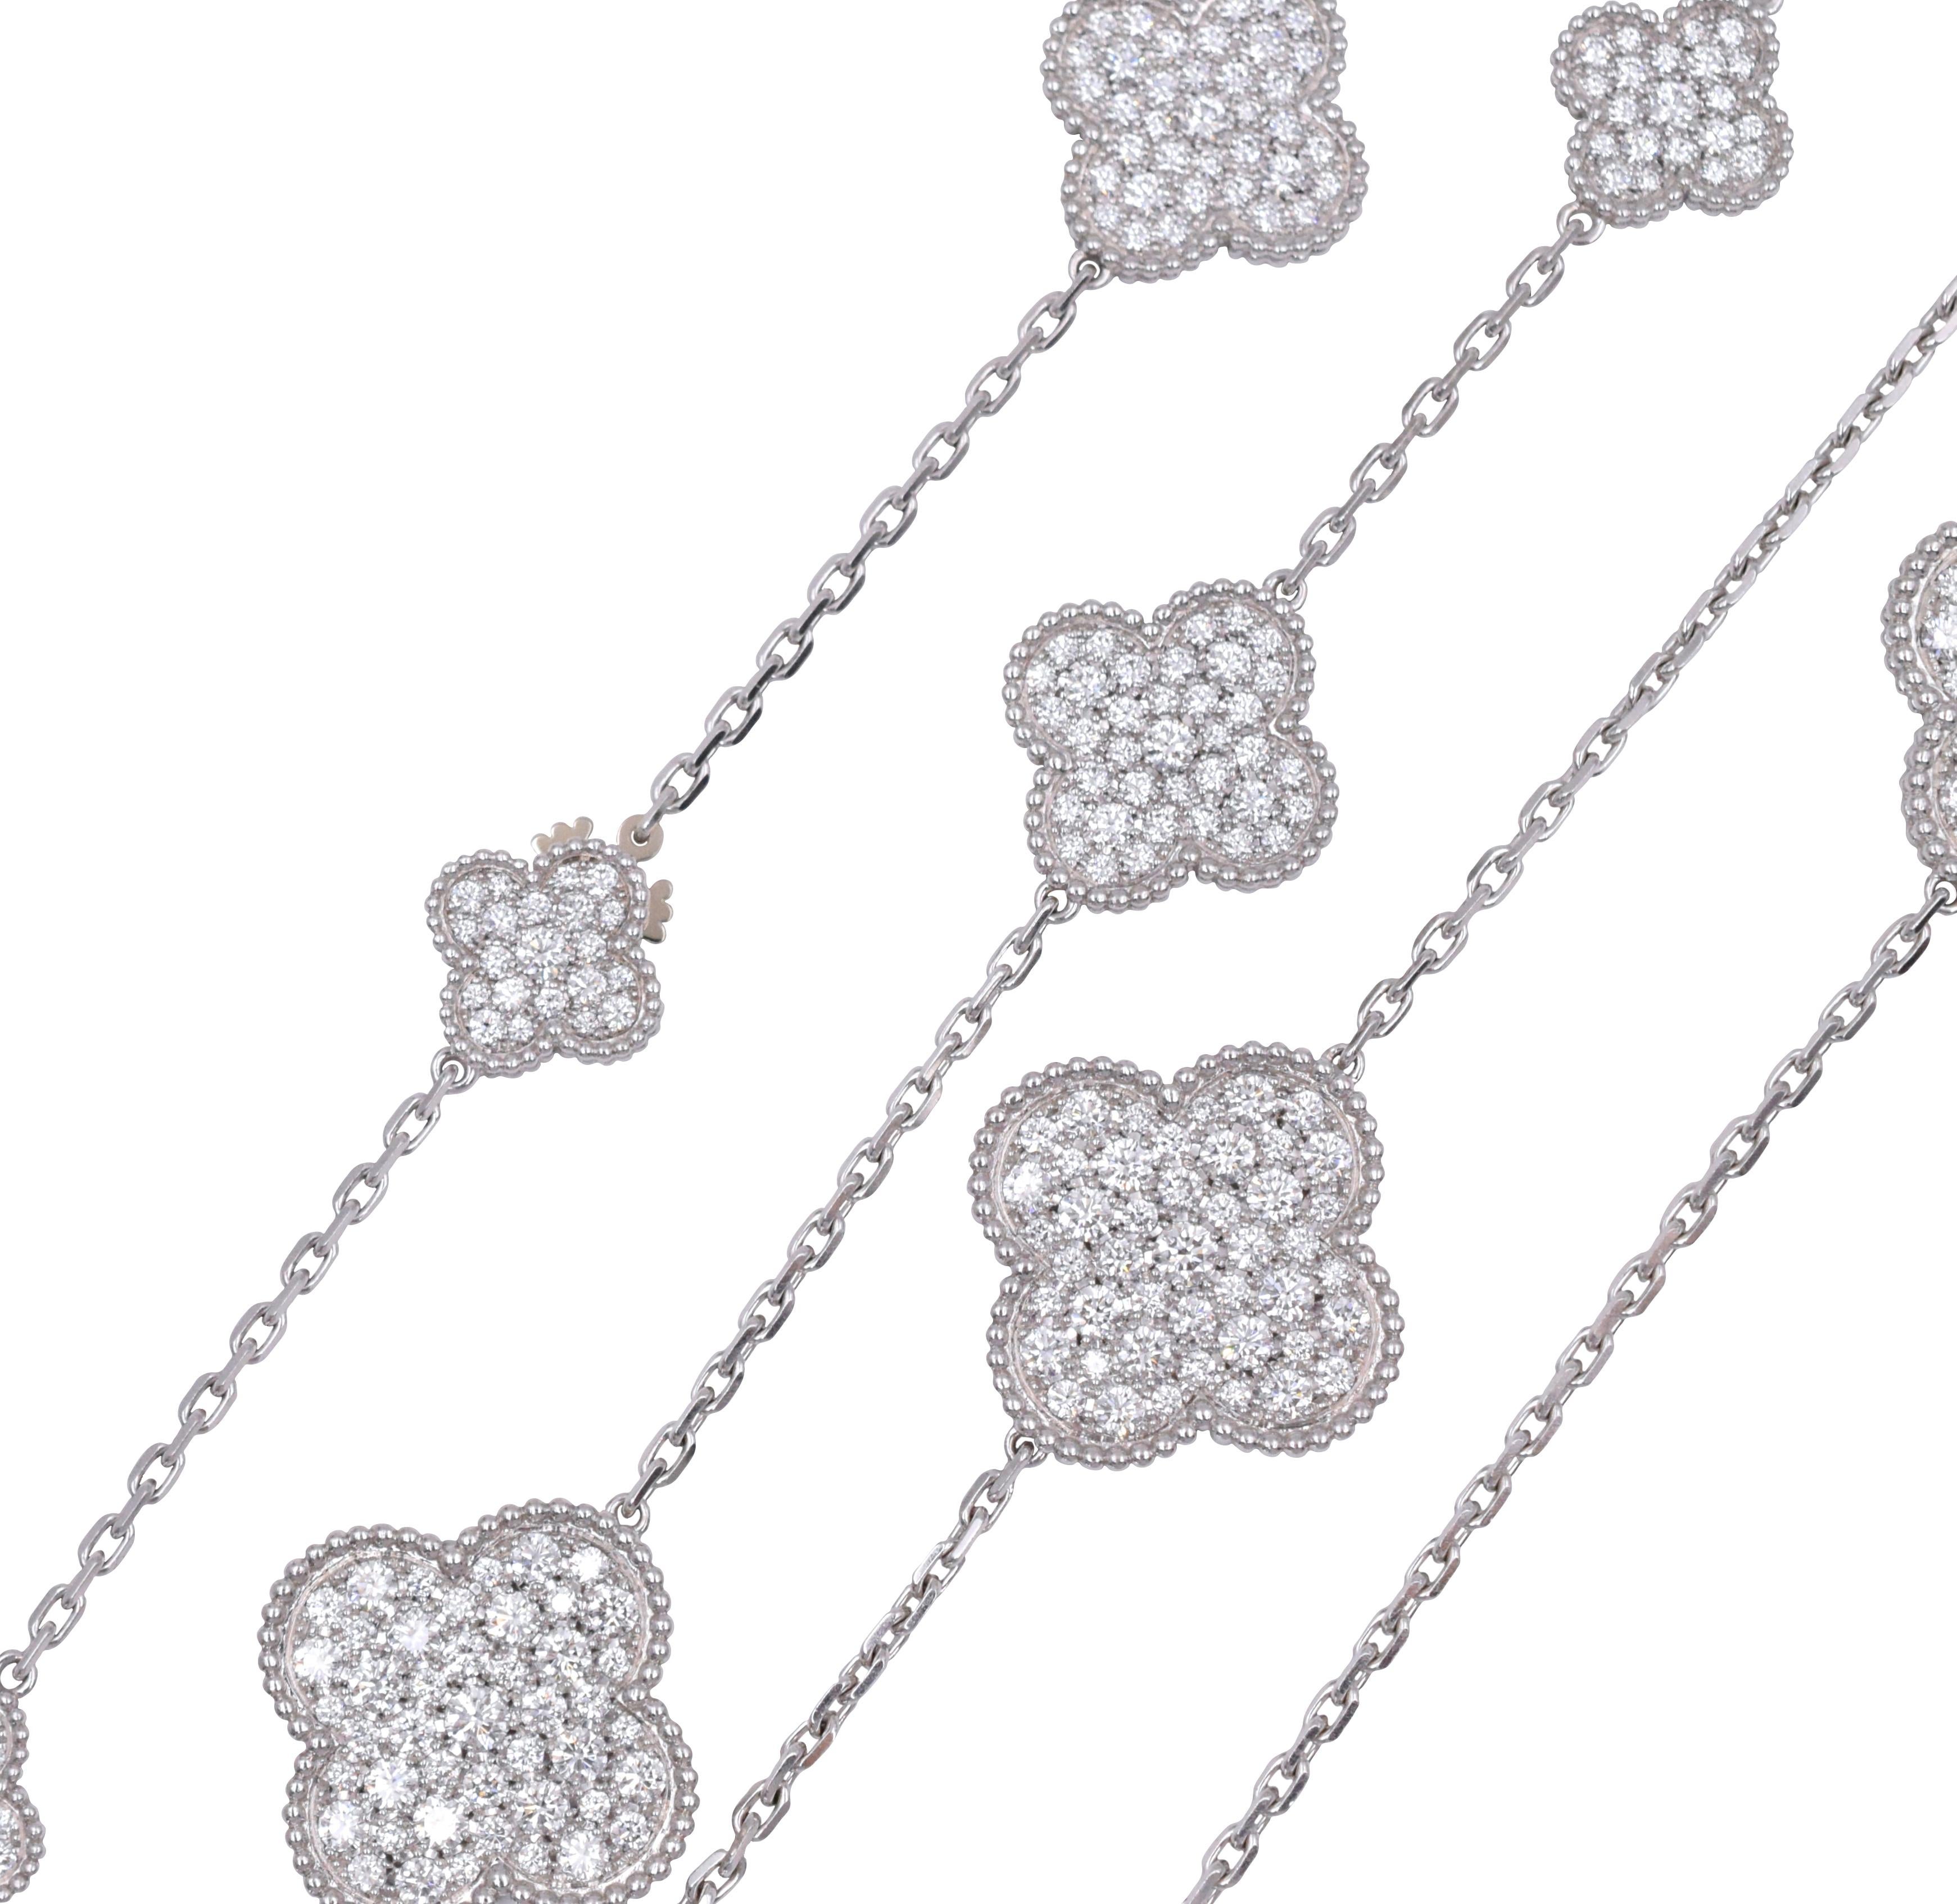 Van Cleef & Arpels Diamond Magic Alhambra Necklace This necklace has approximately 17ct of round brilliant cut diamonds all set in 16 motifs of 18k white gold. Signed VCA, Au750, JEXXXXXX. 